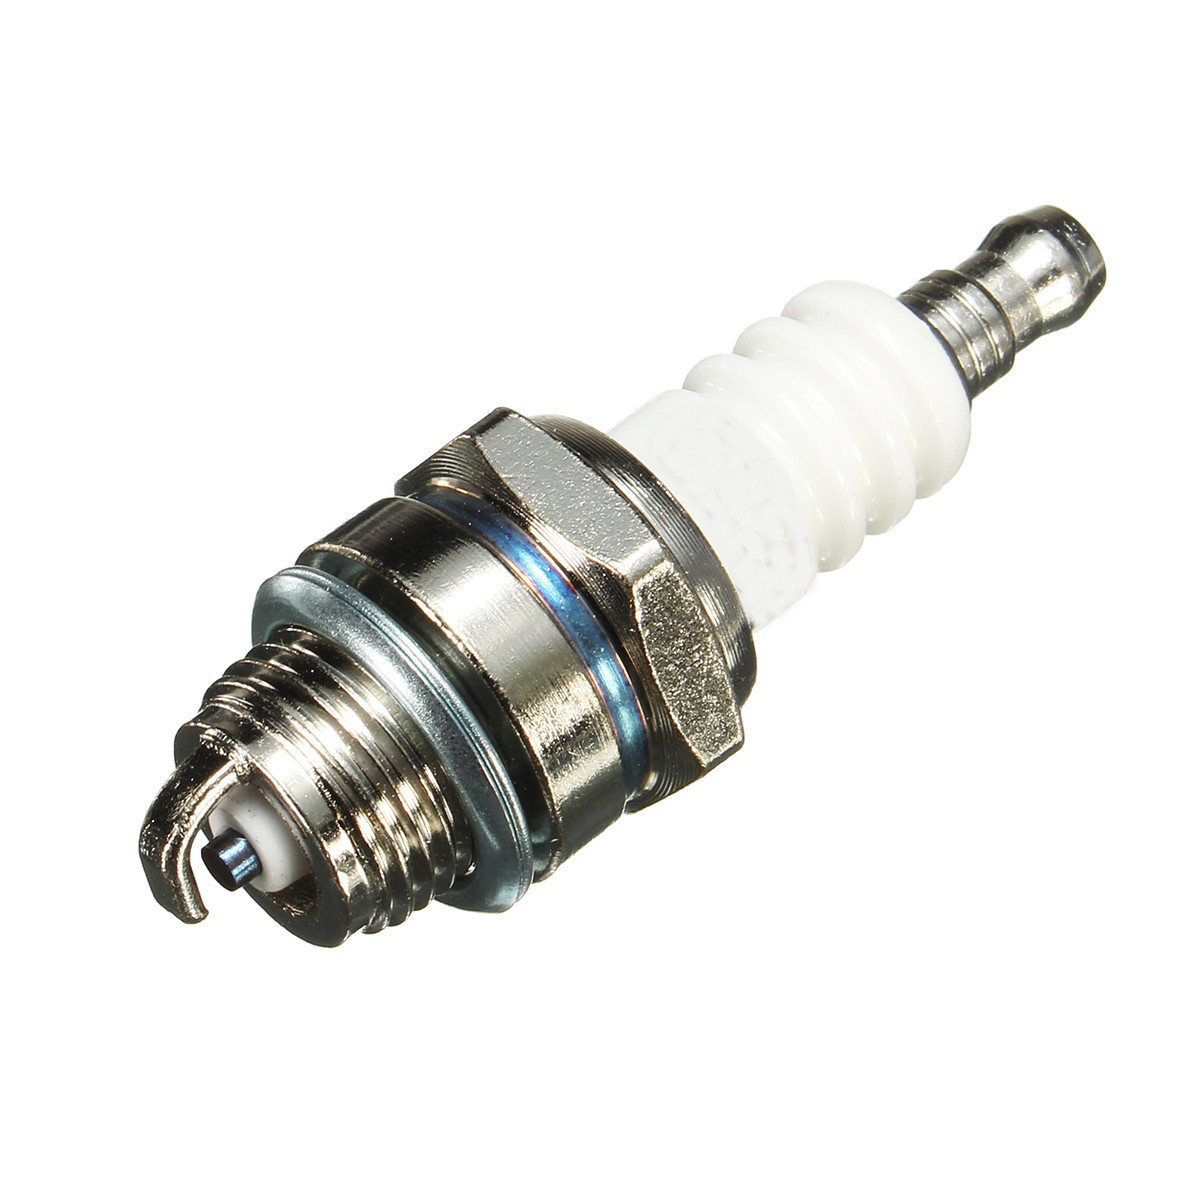 RJ19LM-BR2LM-Lawnmower-Spark-Plug-for-Briggs-and-Stratton-Engines-Motors-1339644-6